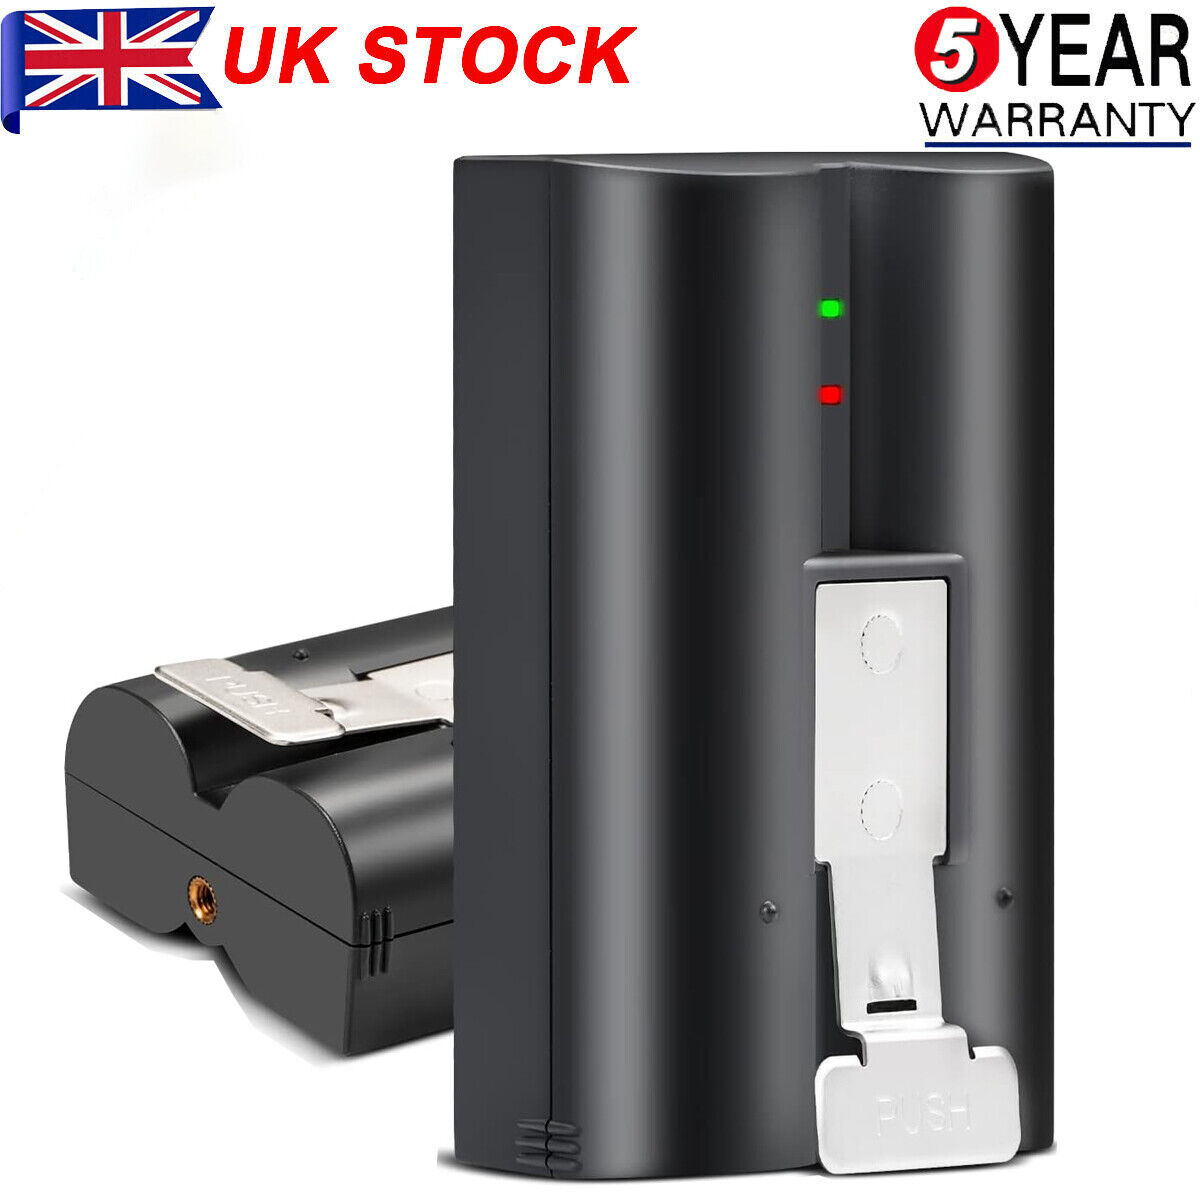 Rechargeable Battery Pack 6200mAh for Ring Video Doorbell 2 3 Stick Up Cam UK